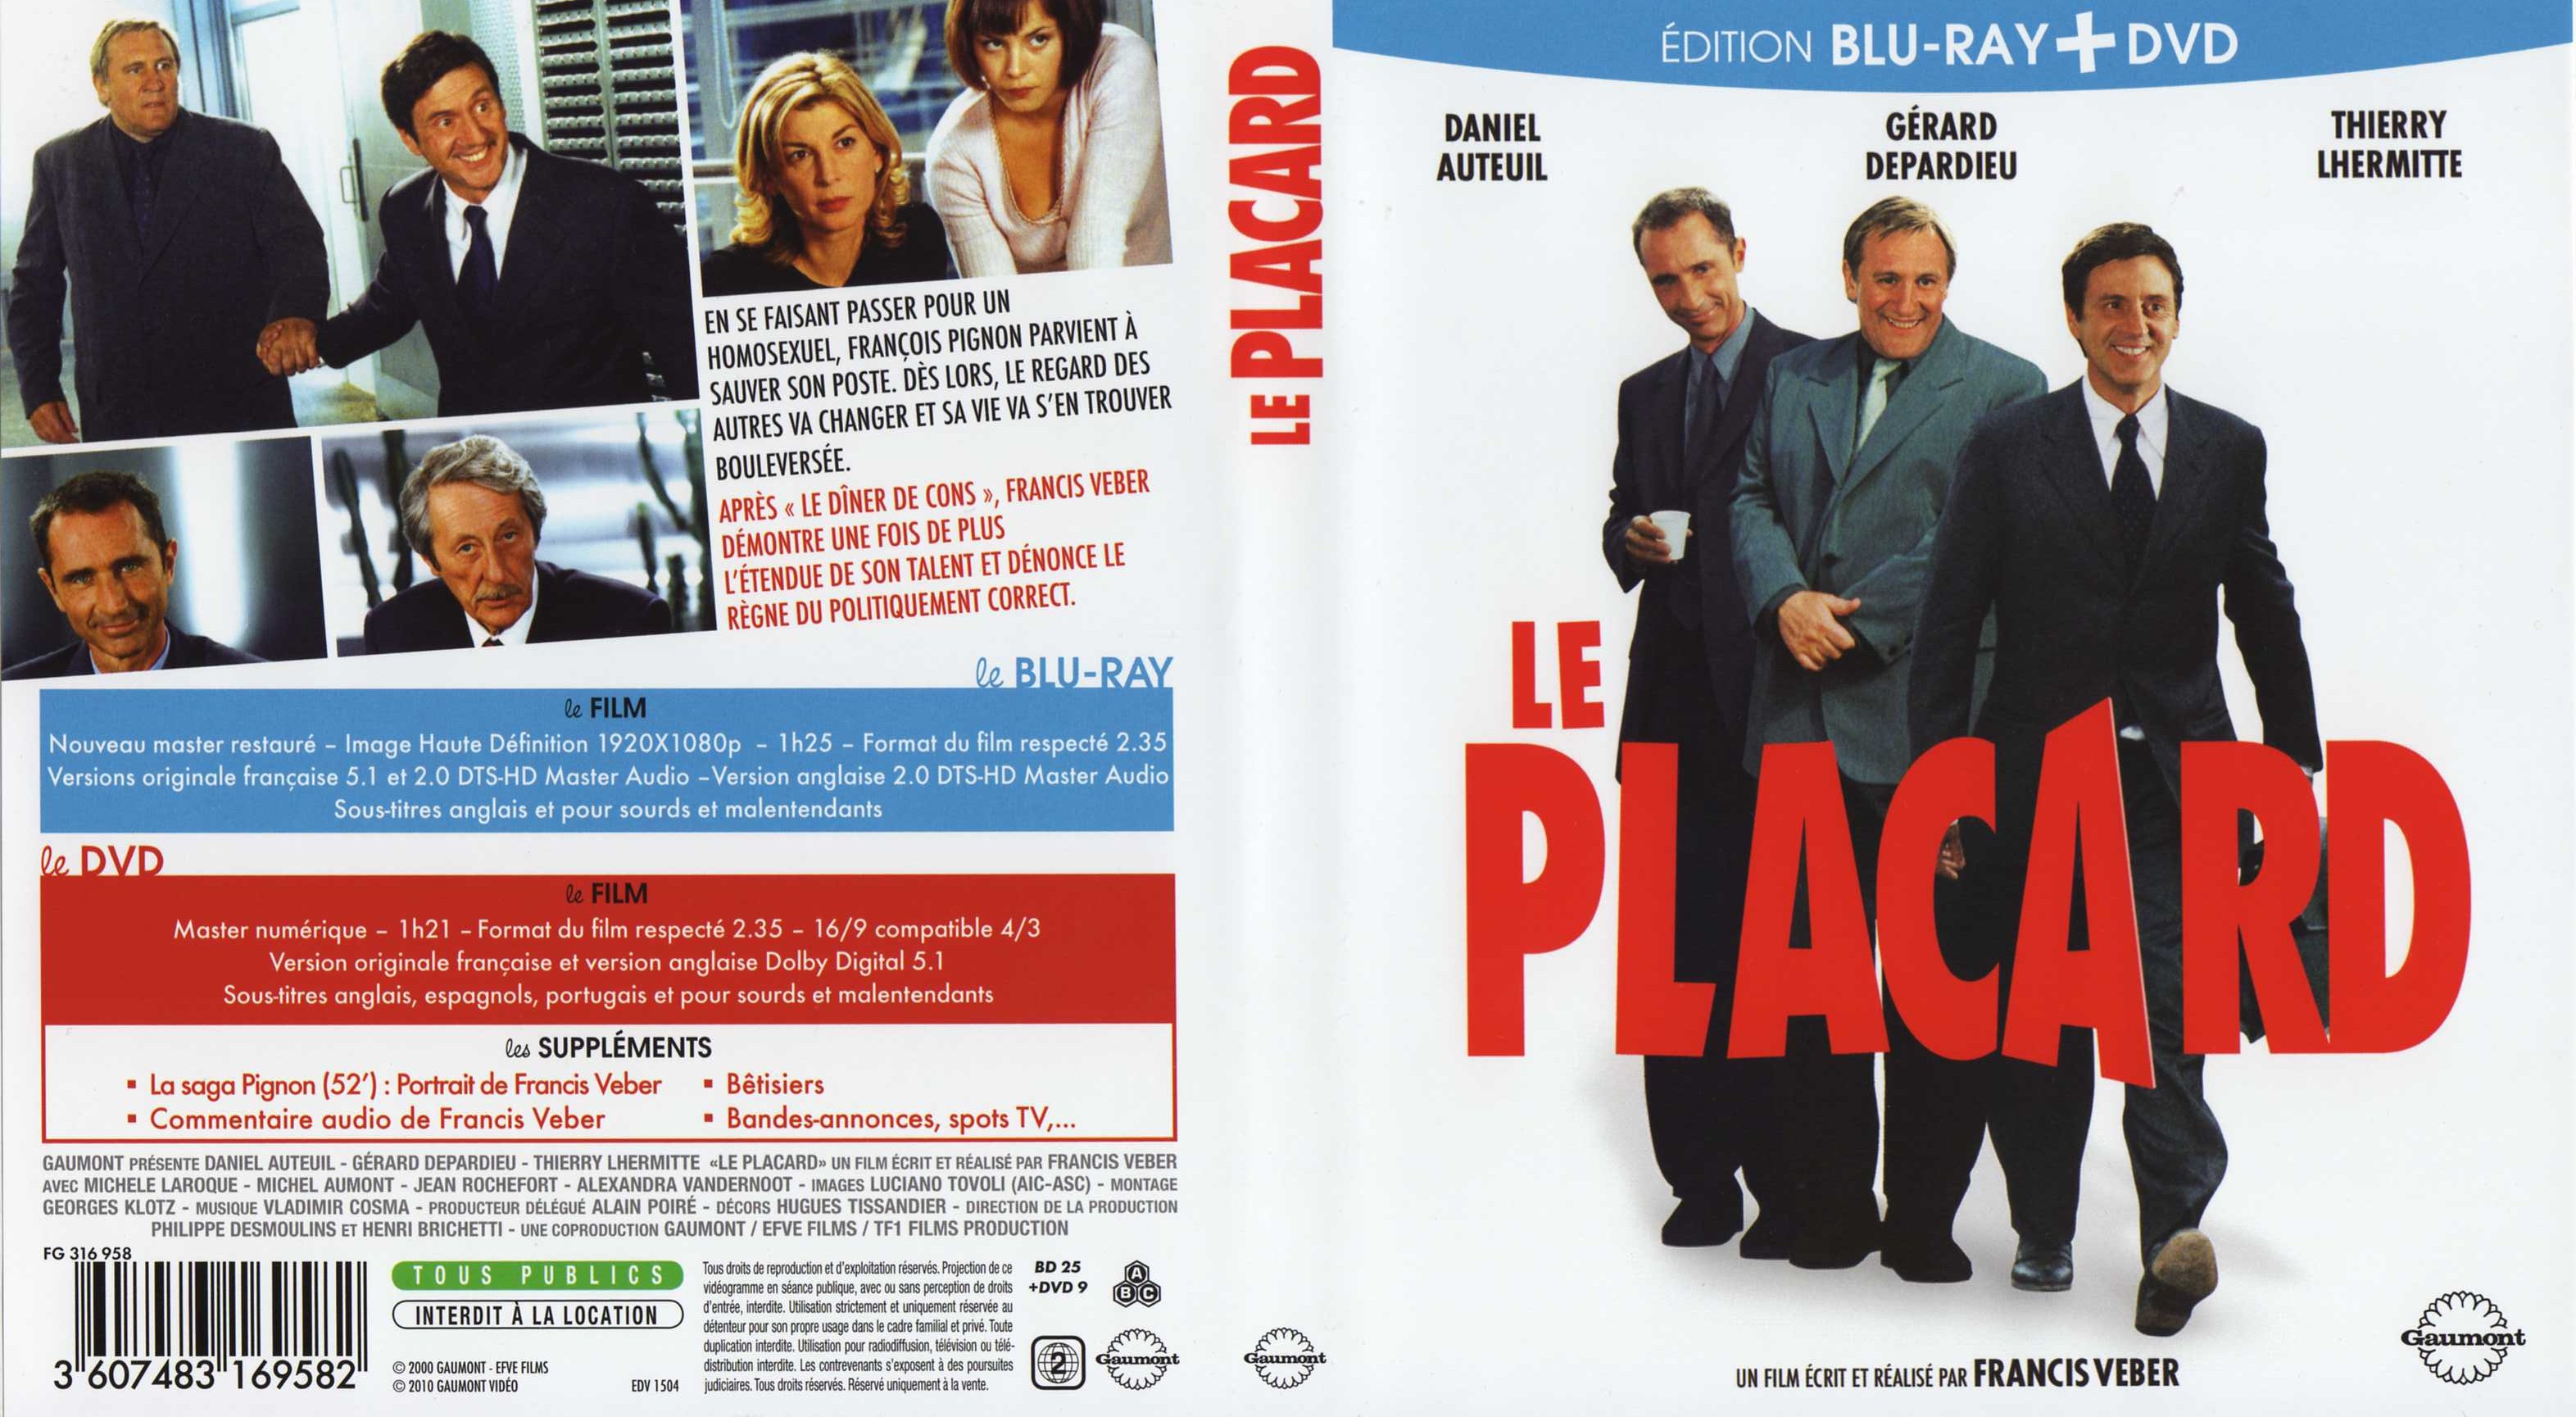 Jaquette DVD Le placard (BLU-RAY)